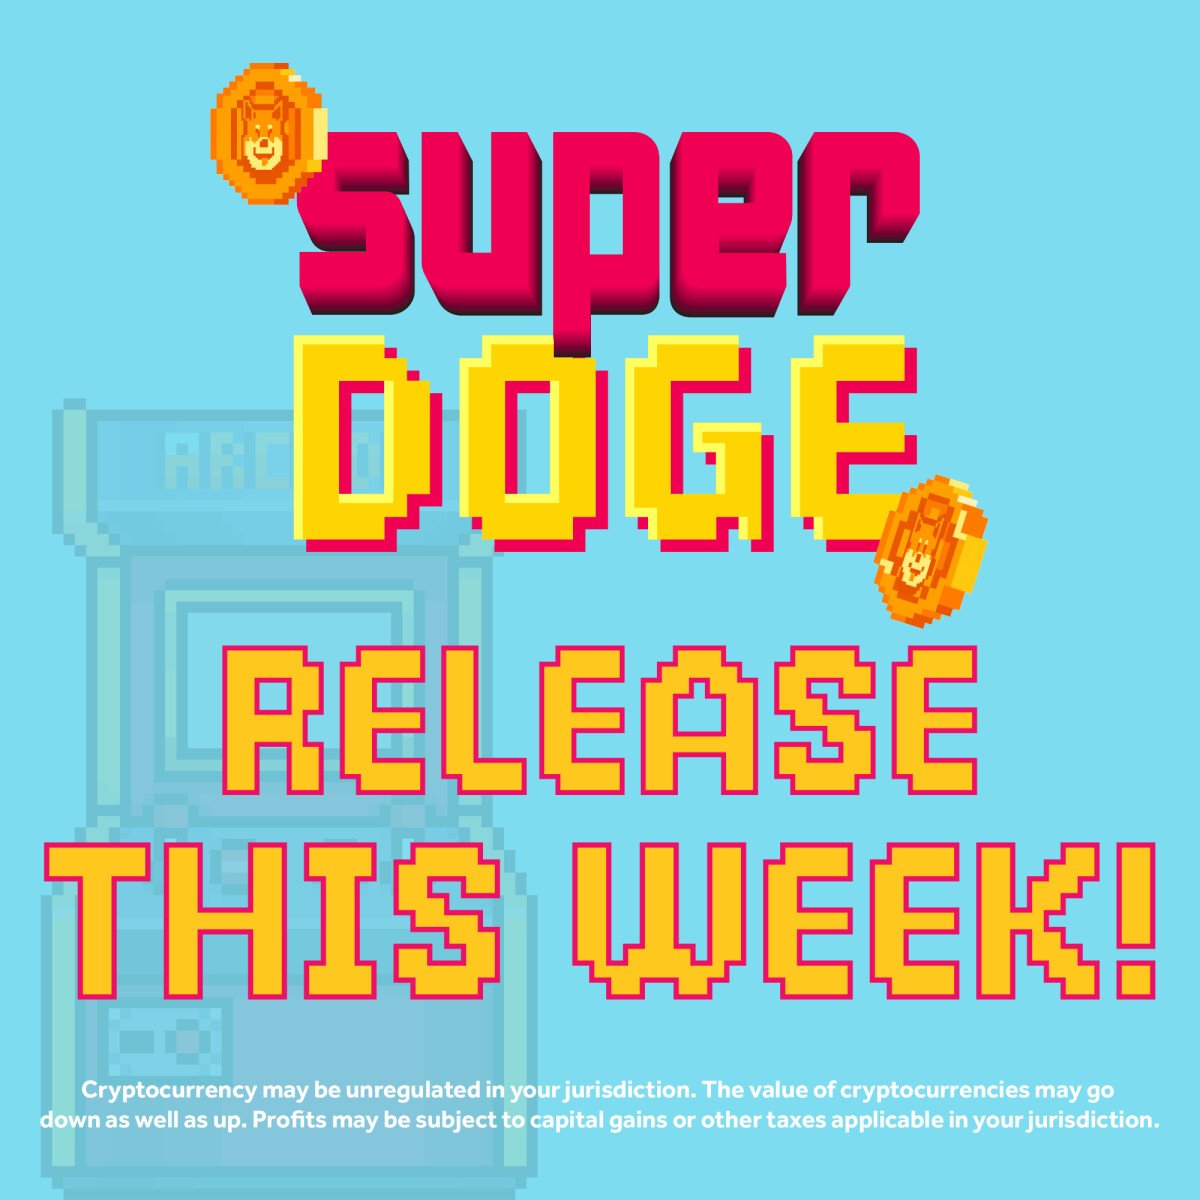 Axie Infinity Price Slips, But Play-to-Earn Meme Coin Tamadoge Pumps 20% on Super Doge Game Launch News